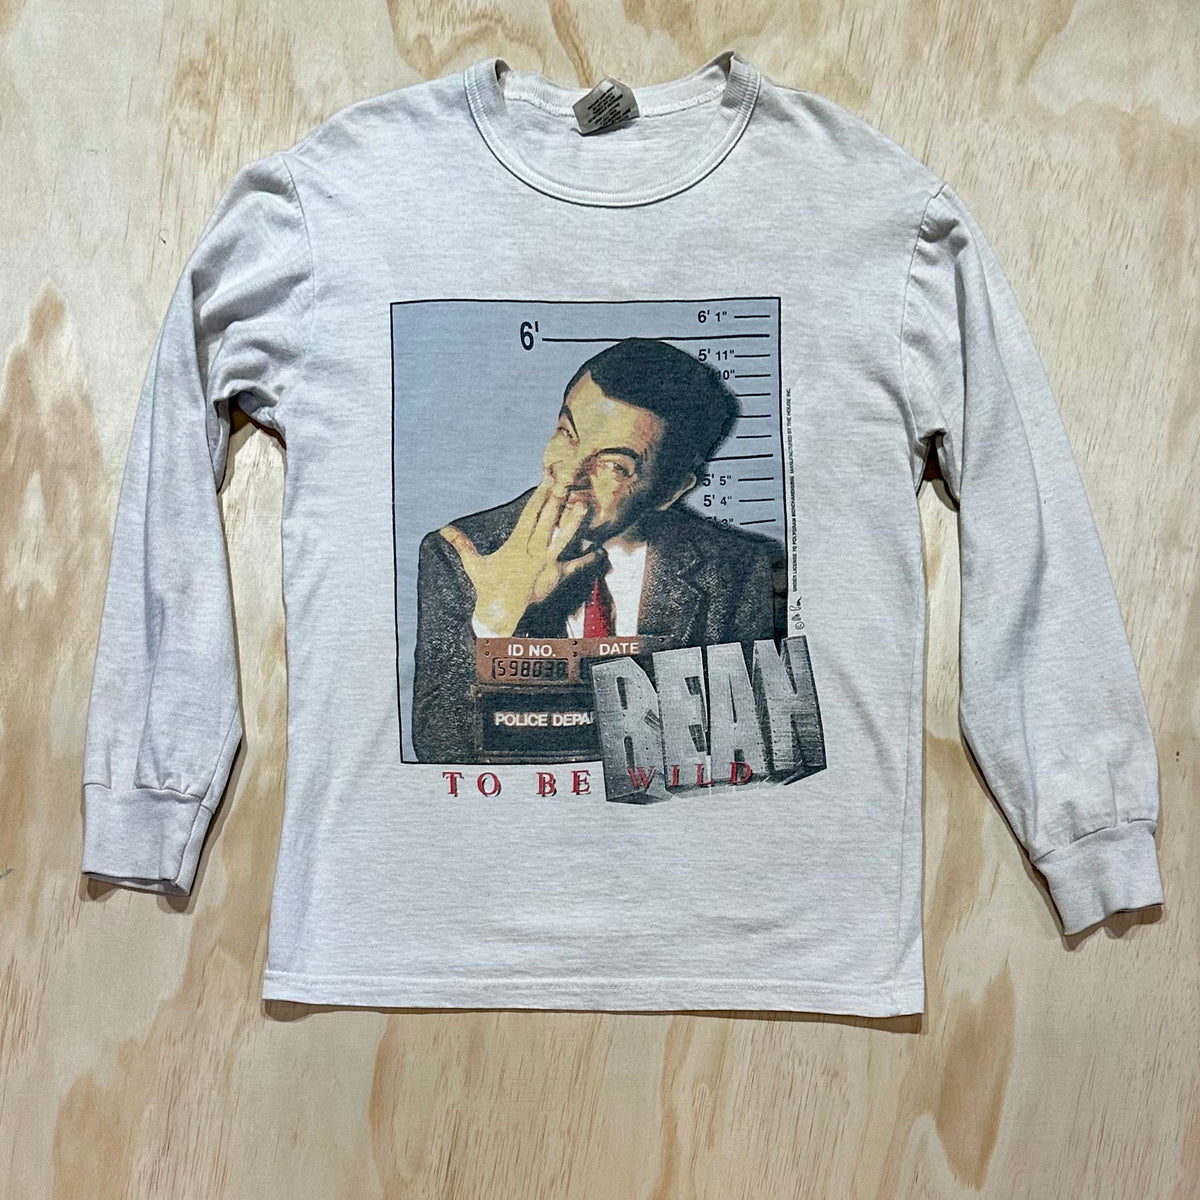 Vintage 90s Bean To Be Wild Mr Bean Show Long Sleeve Shirt